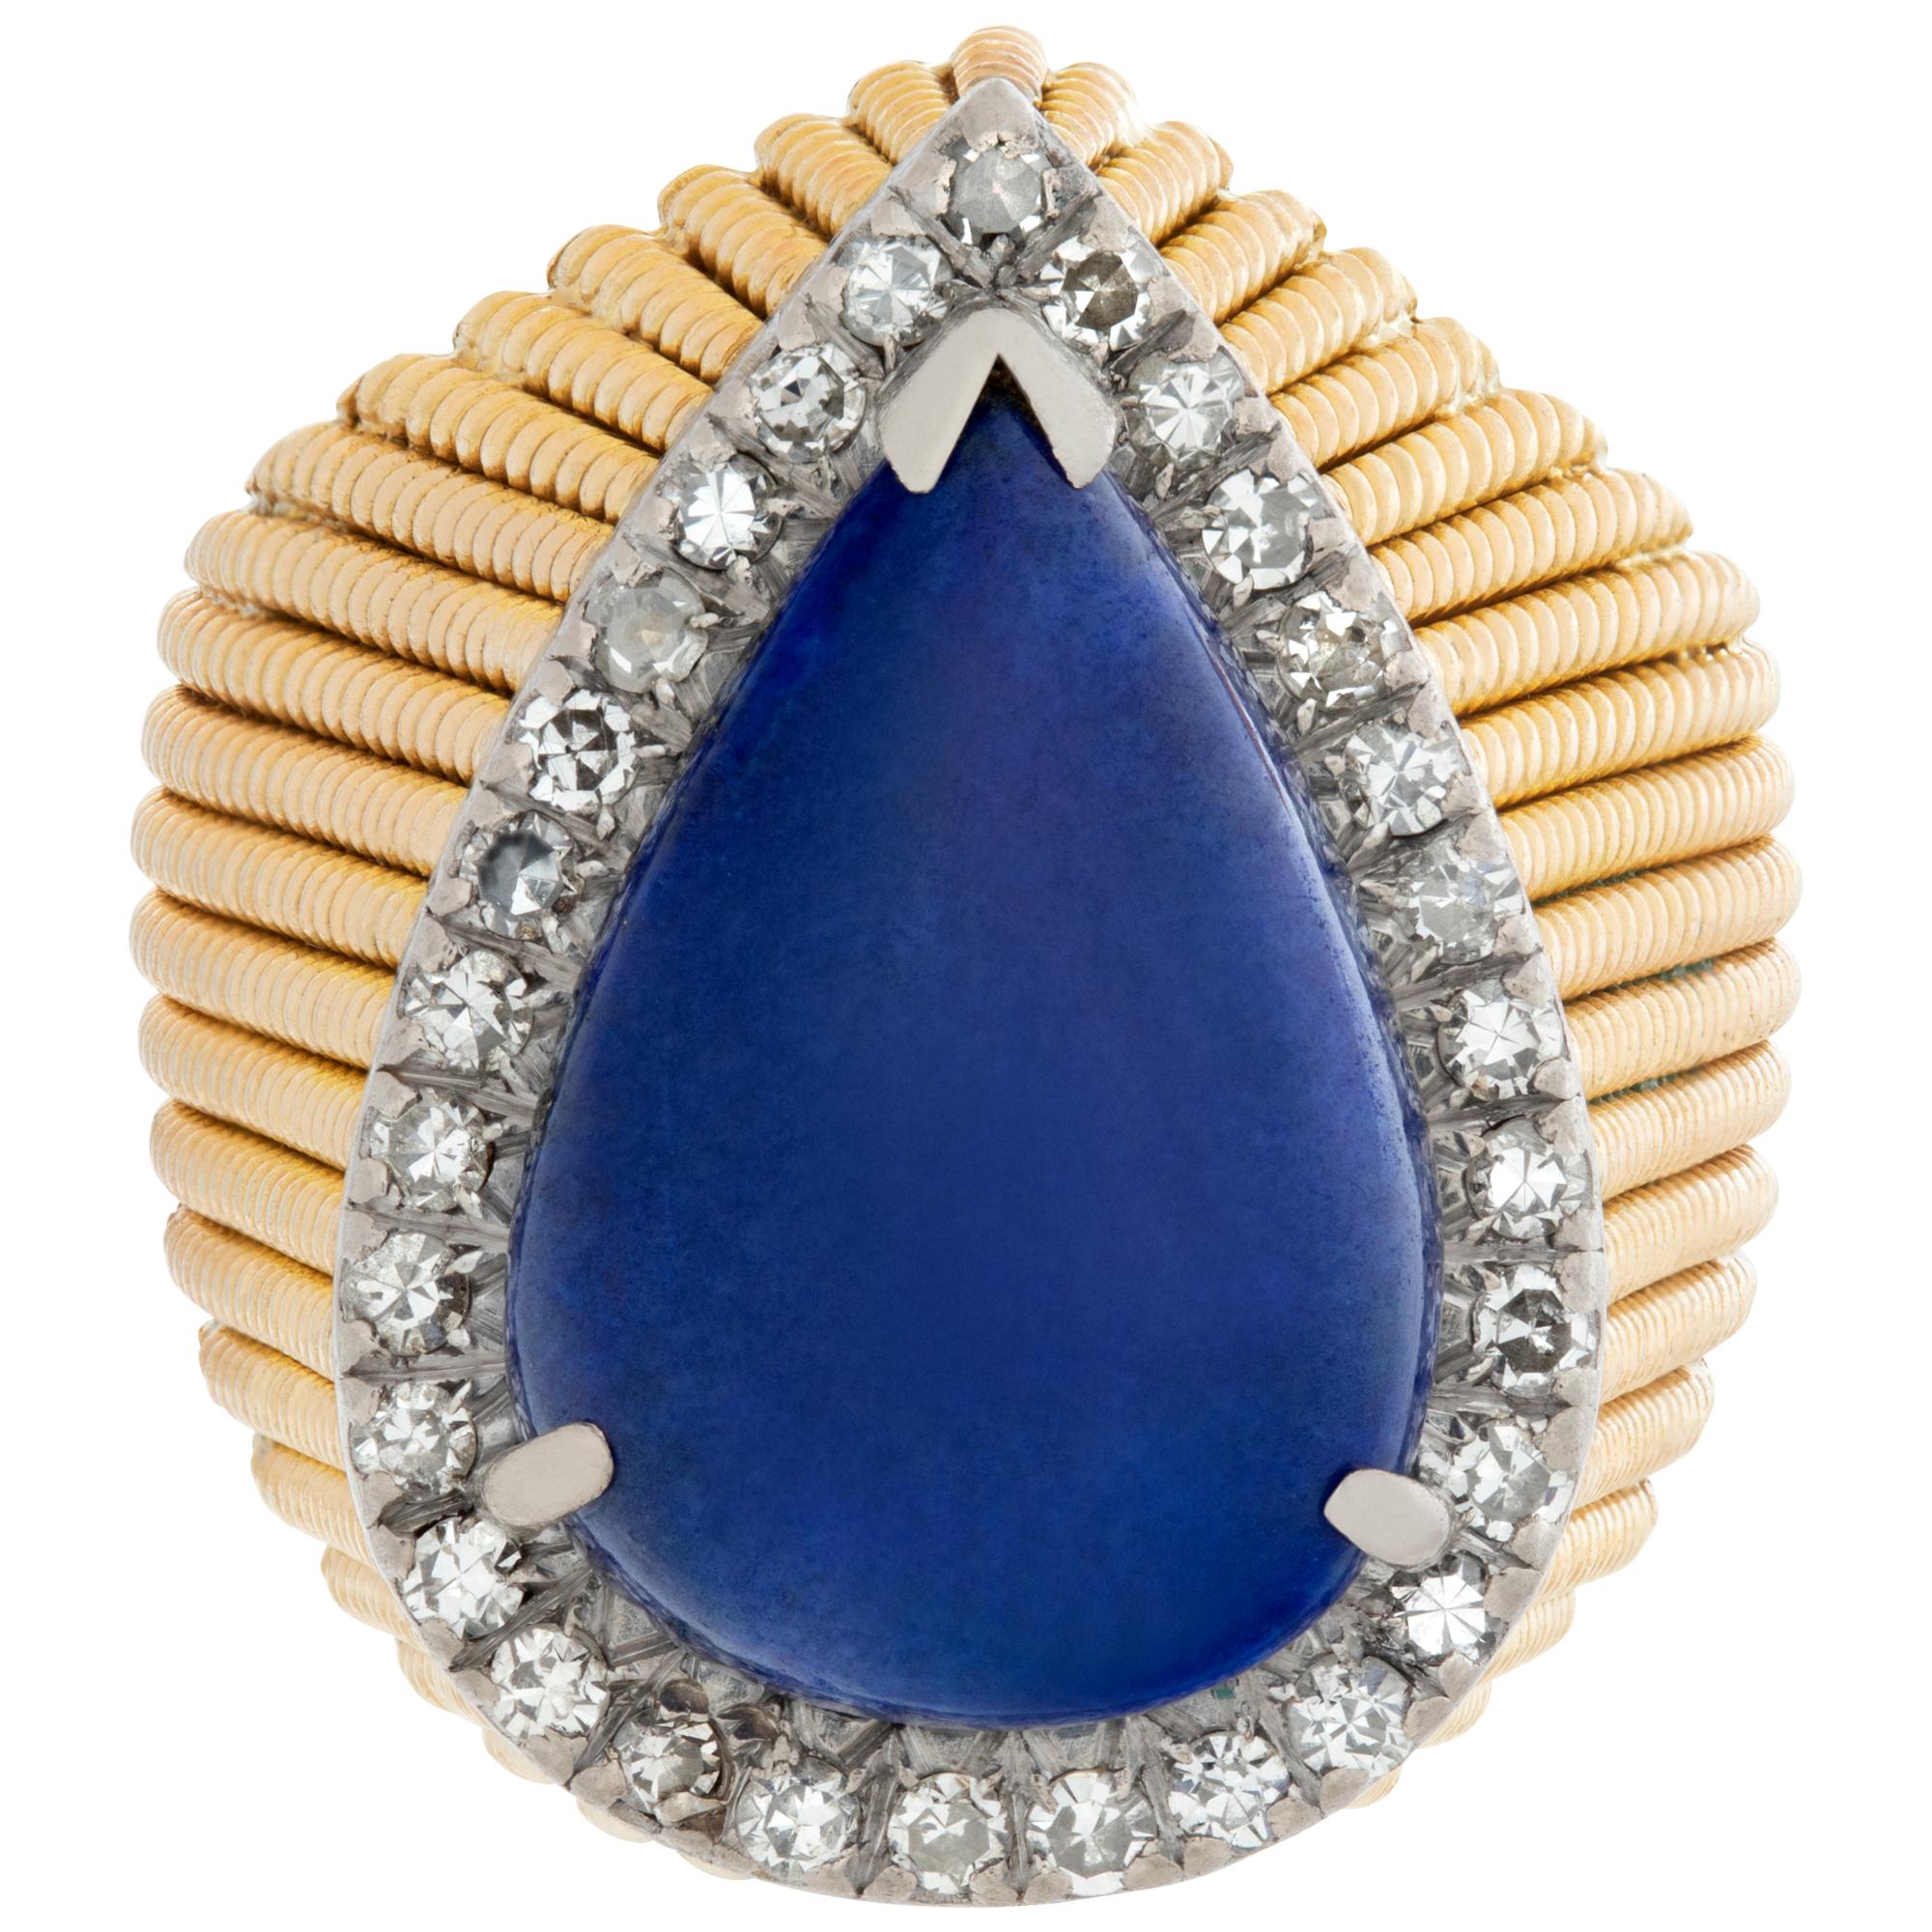 Cabochon pear shape cut lapis lazuli ring in 14k textured yellow gold, with approx. 0.50 carat round brilliant cut diamonds, estimate G-H color,  VS clarity. Size 6.5.This Lapiz ring is currently size 6.5 and some items can be sized up or down,